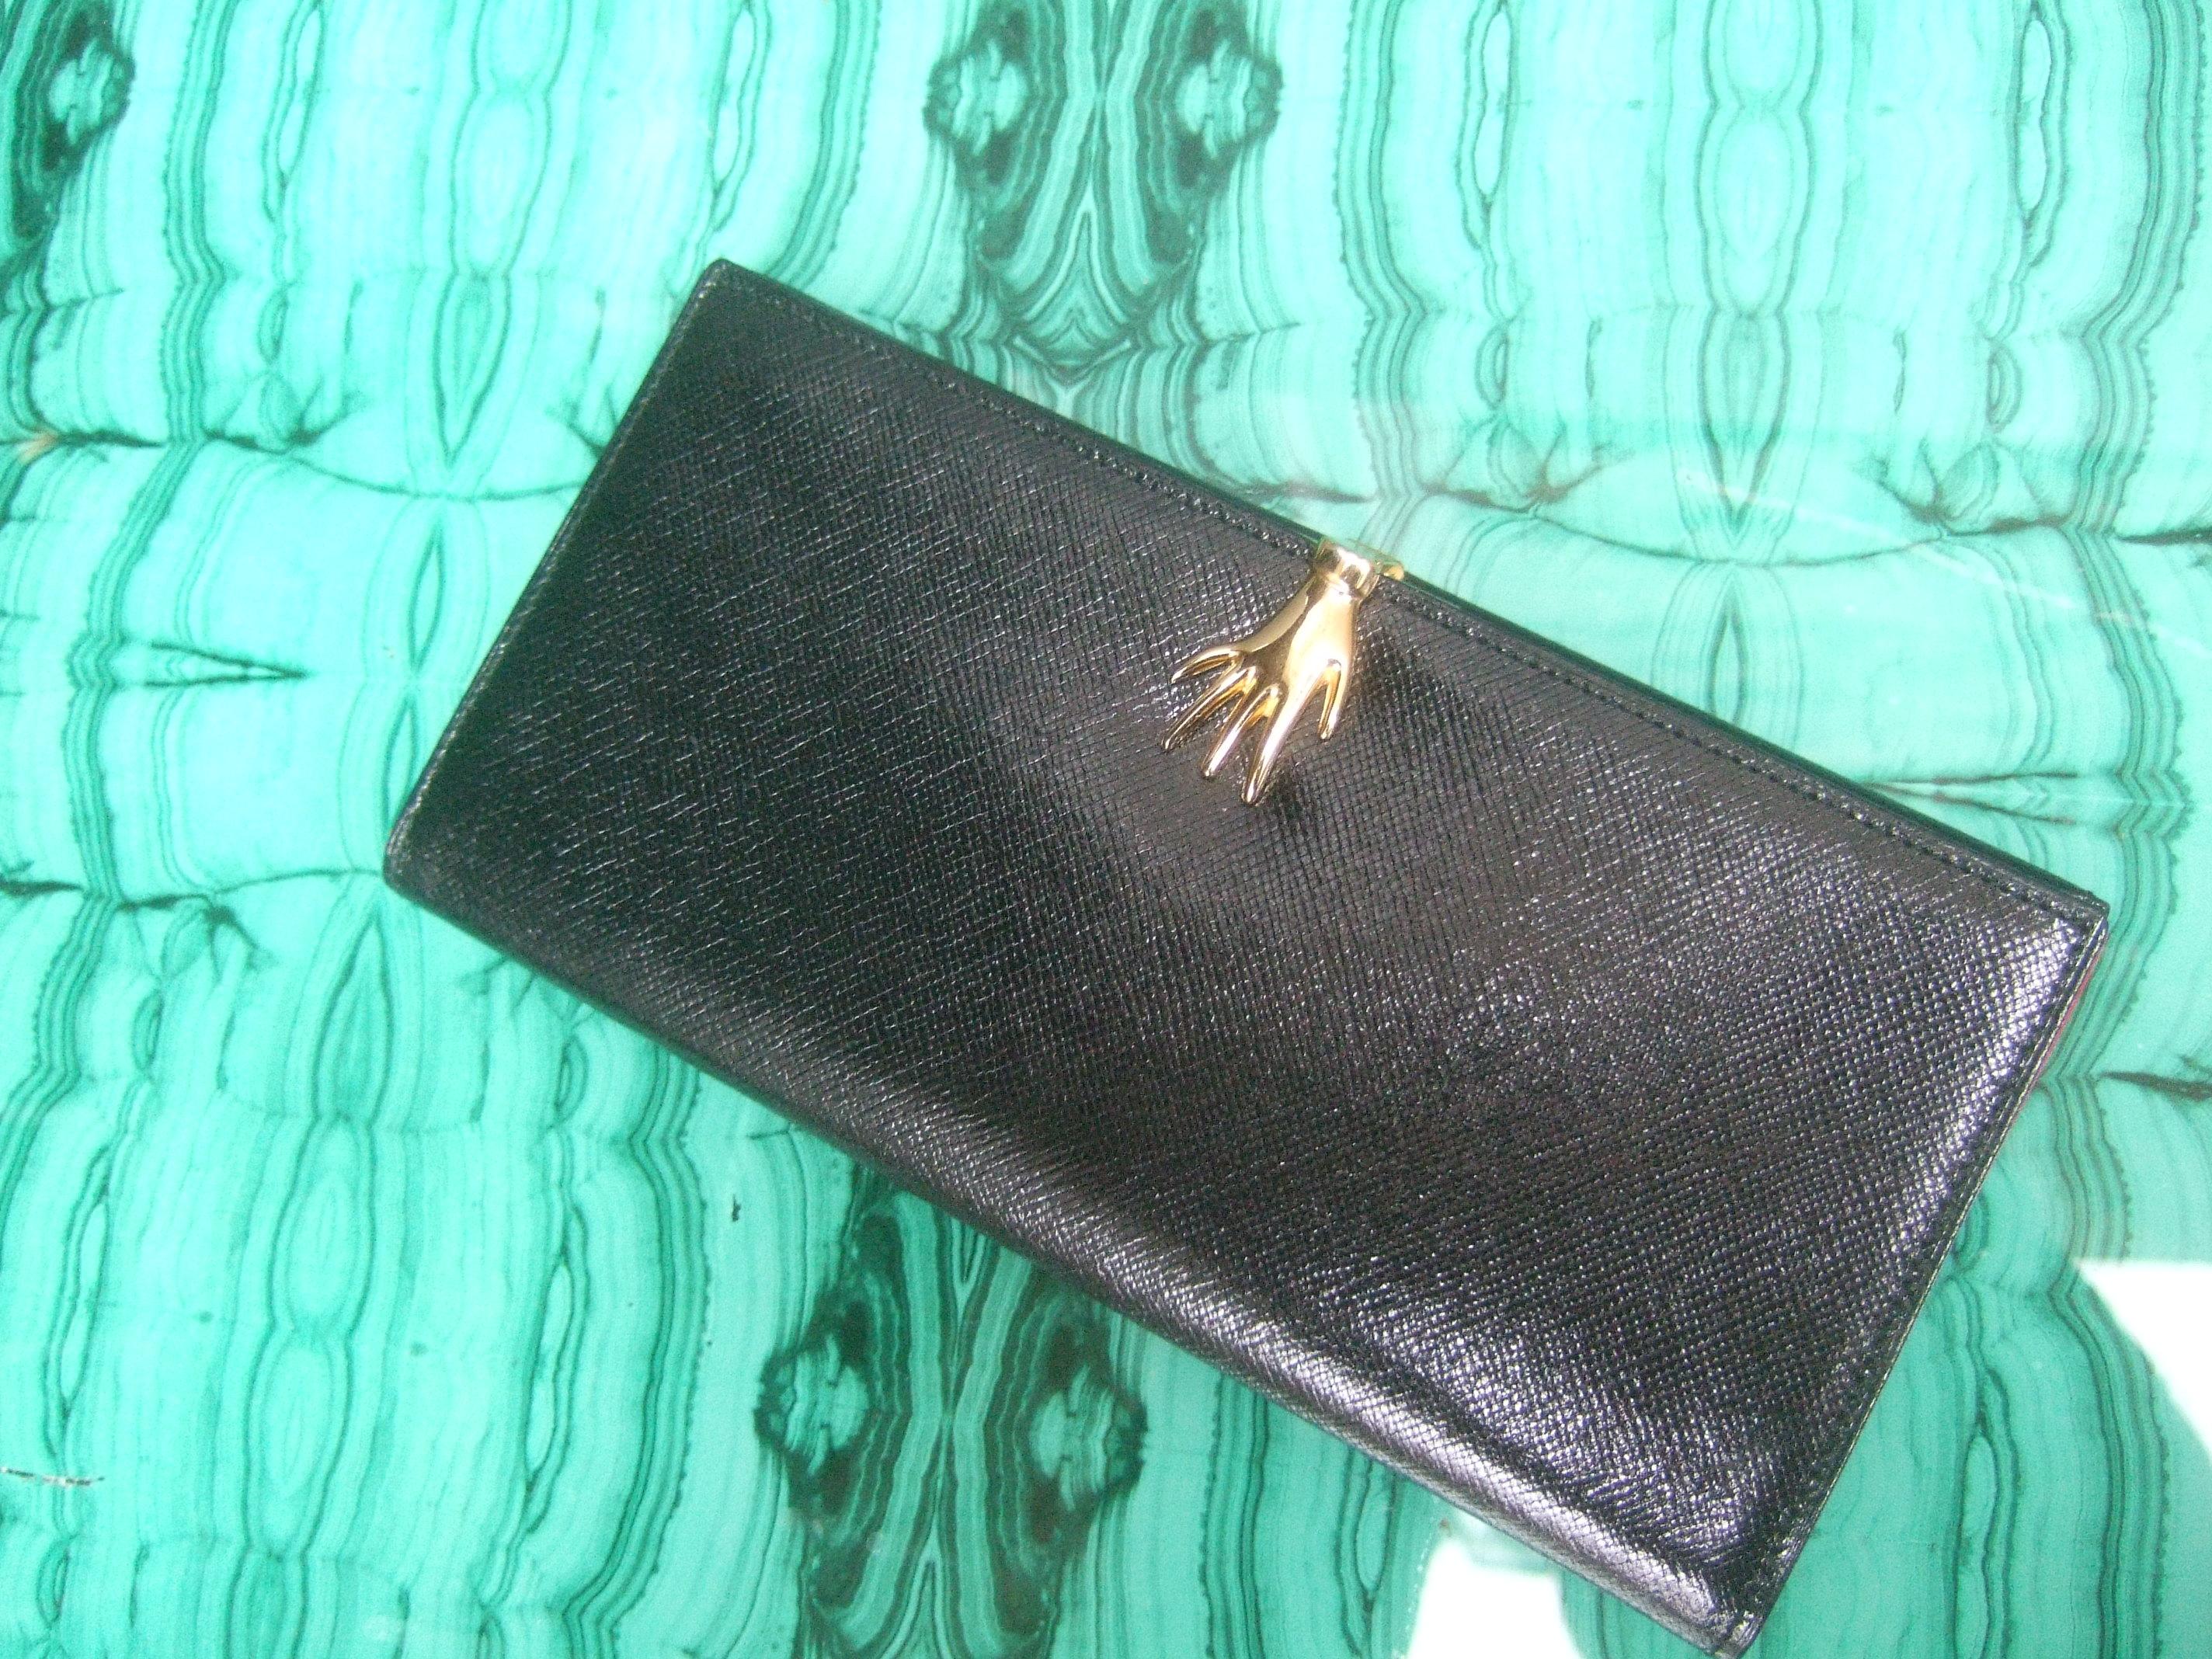 Gucci Italy Rare ebony black leather hand clasp wallet in Gucci presentation box c 1970s
The elegant Italian black leather wallet is designed with a gilt metal hand clasp closure
The cherry red leather interior panels are designed with a pair of